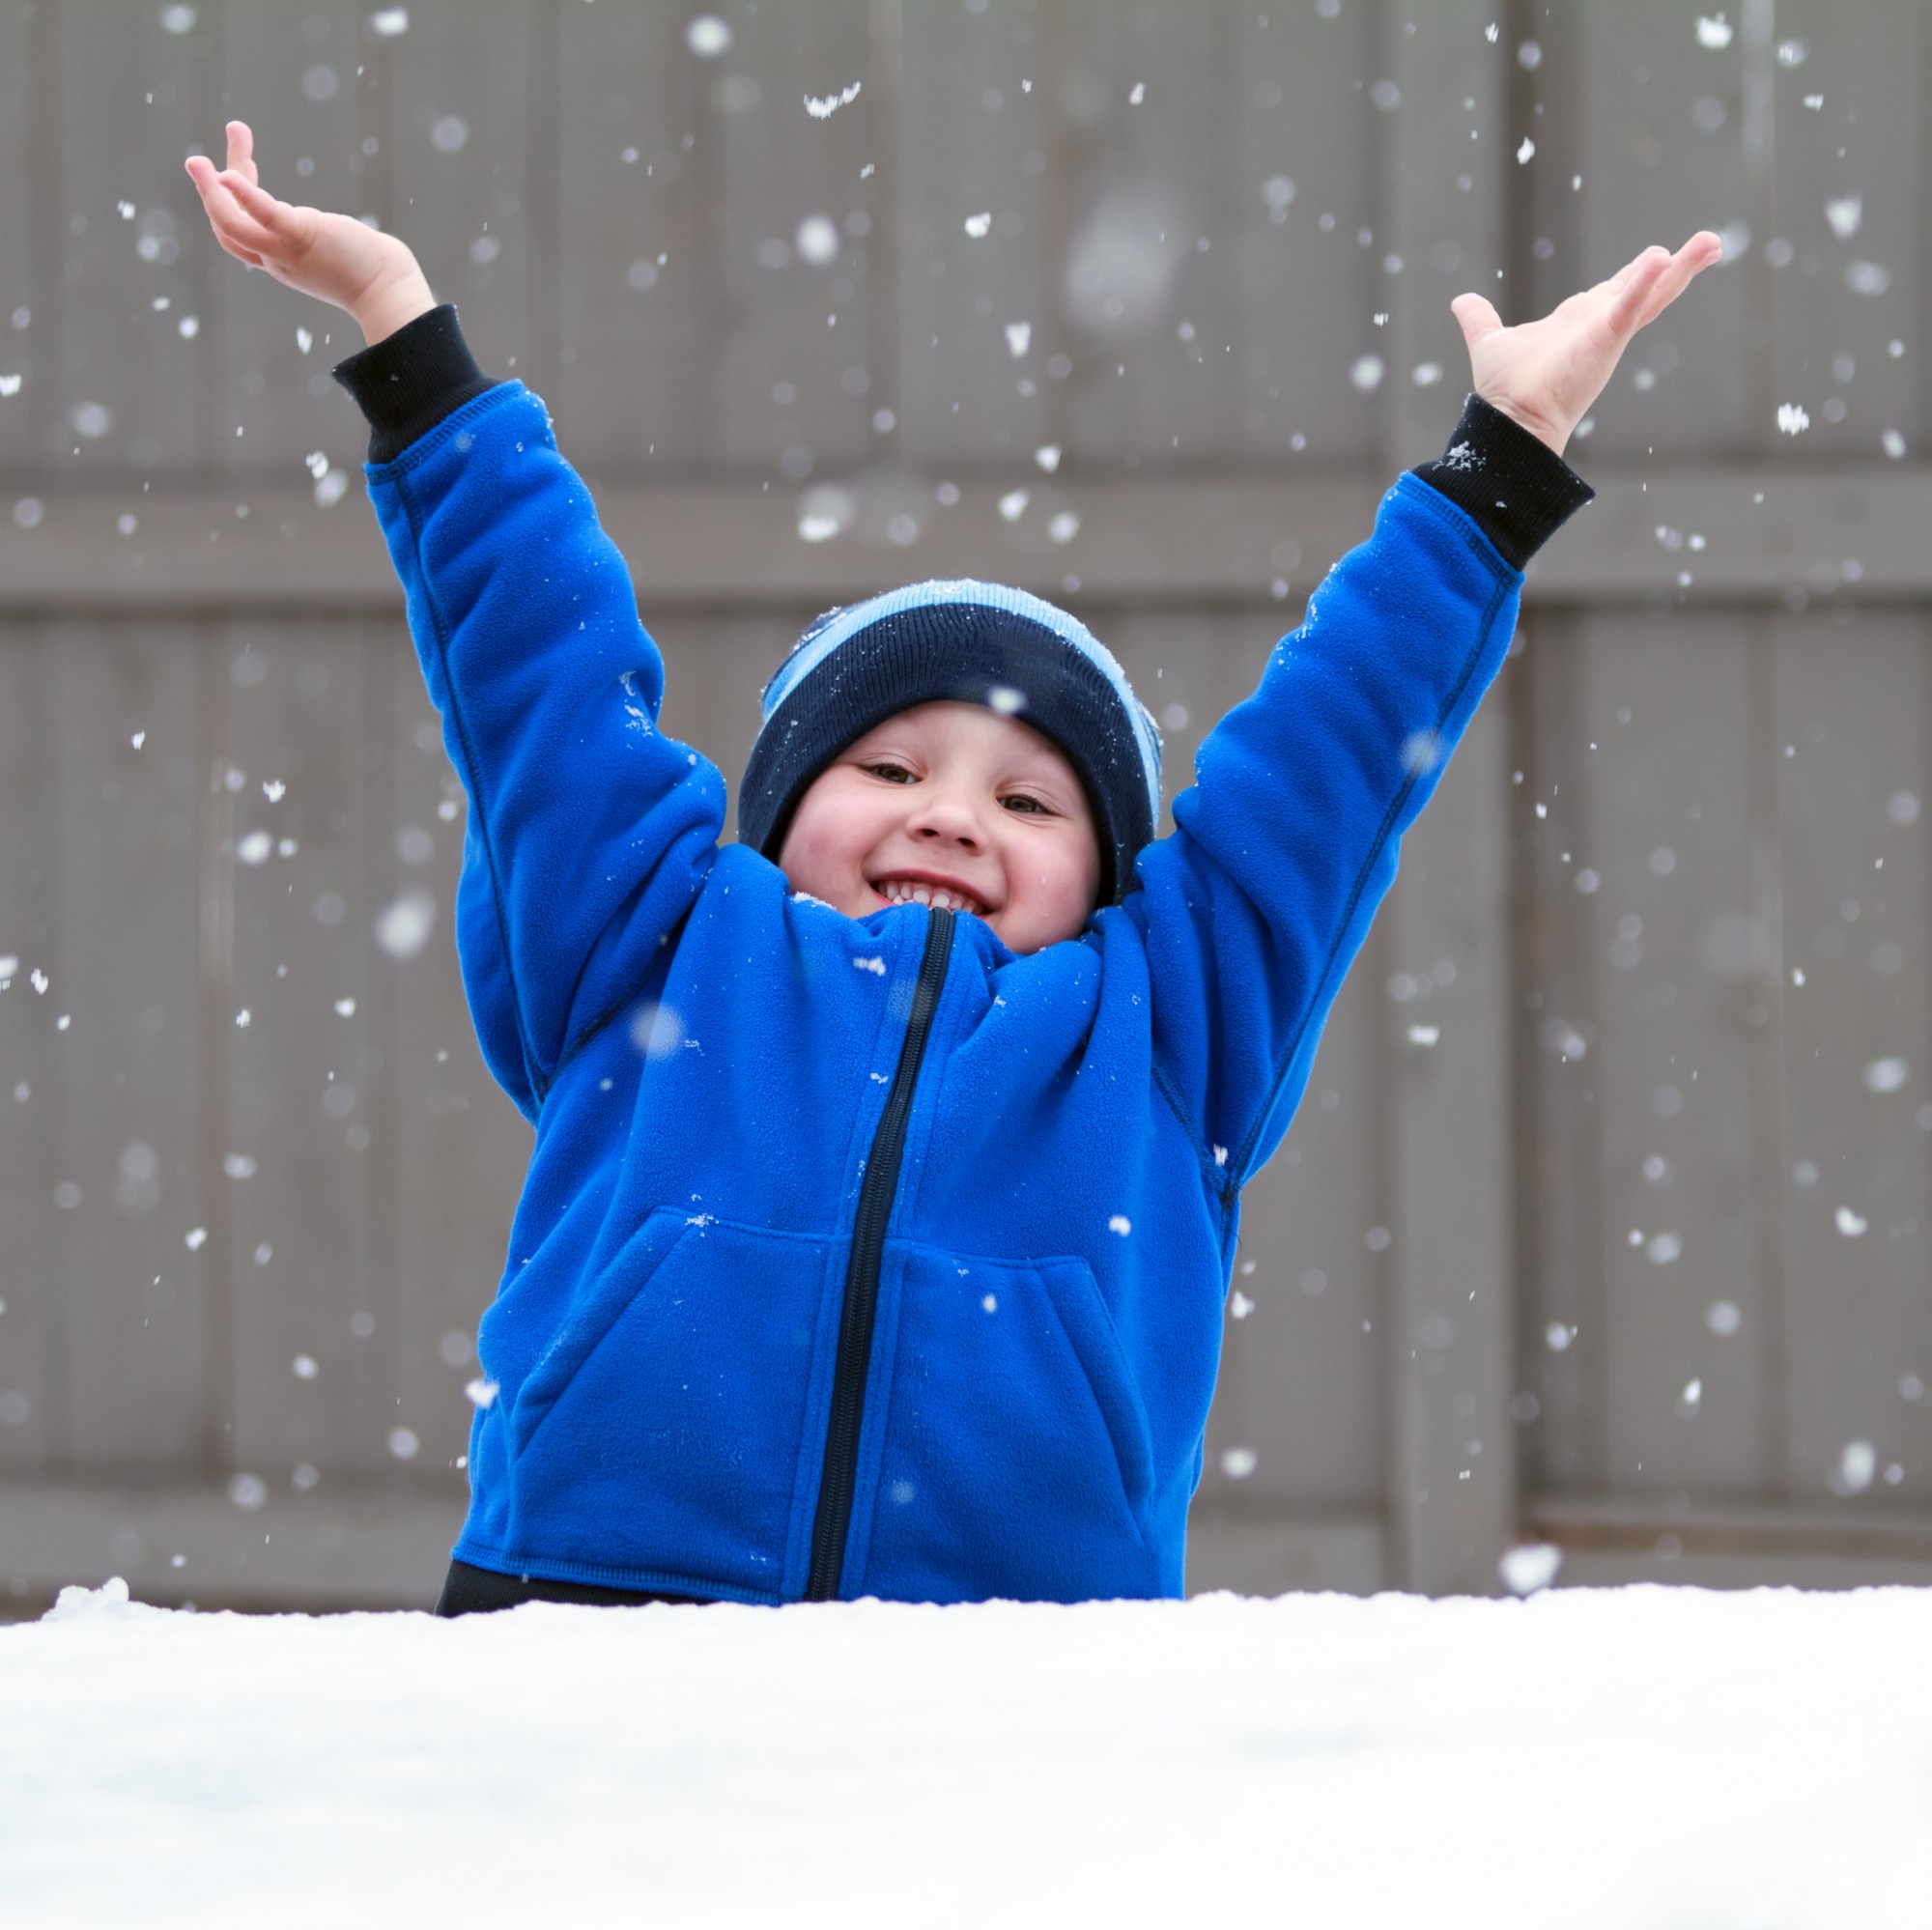 Smiling boy in the snow.